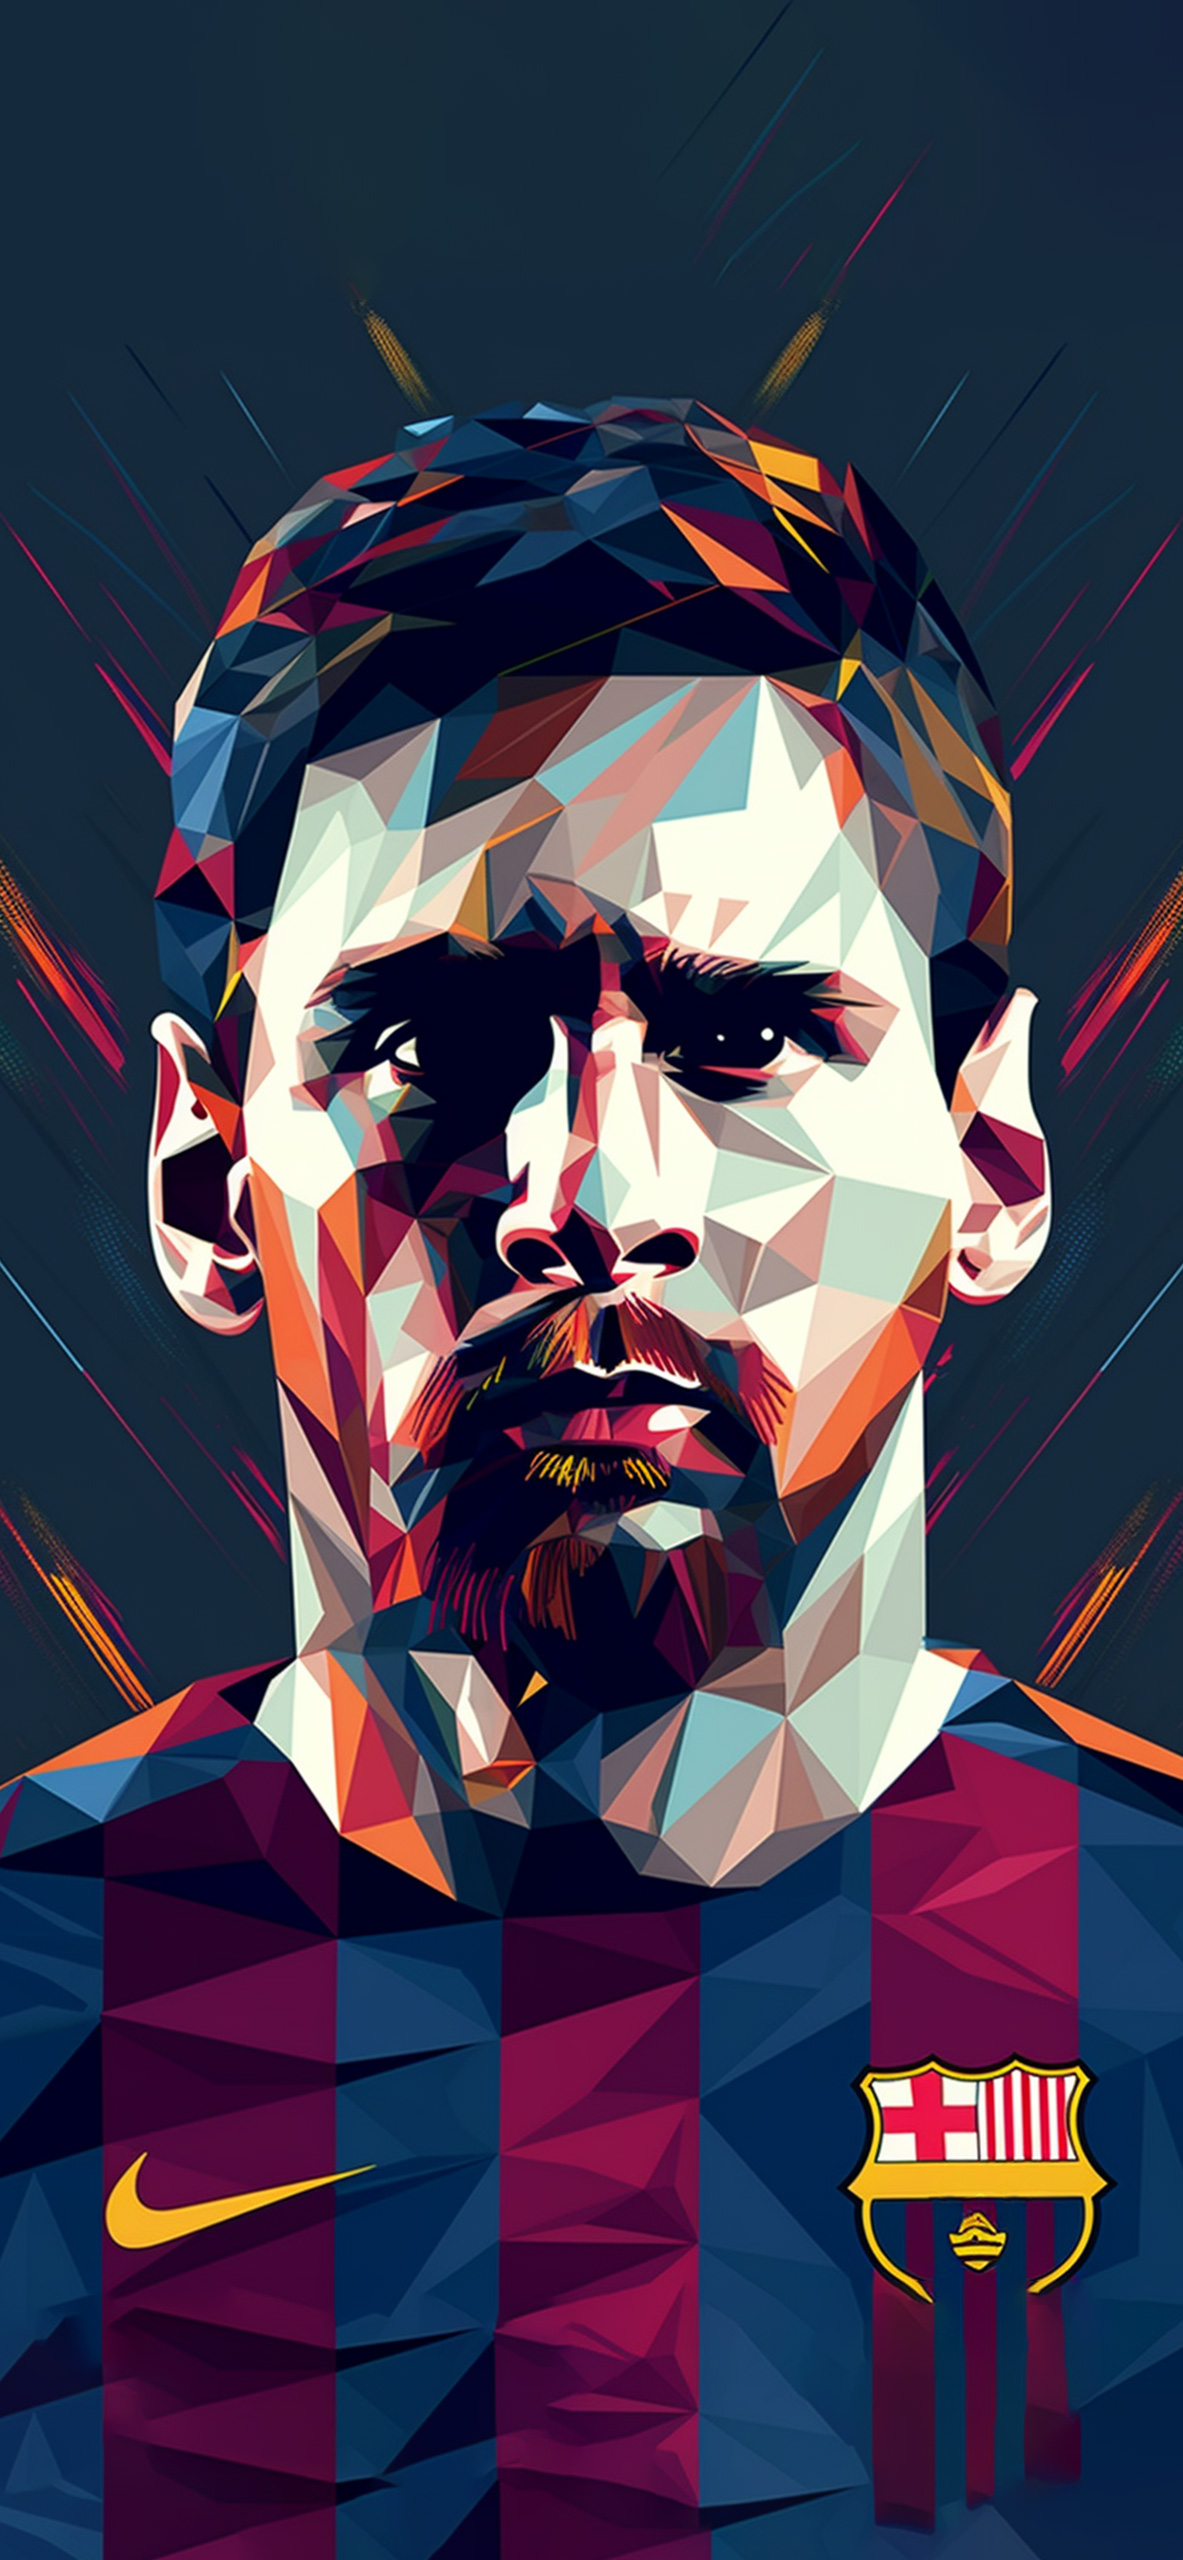 Soccer Lionel Messi wallpaper for Android - Download-sgquangbinhtourist.com.vn